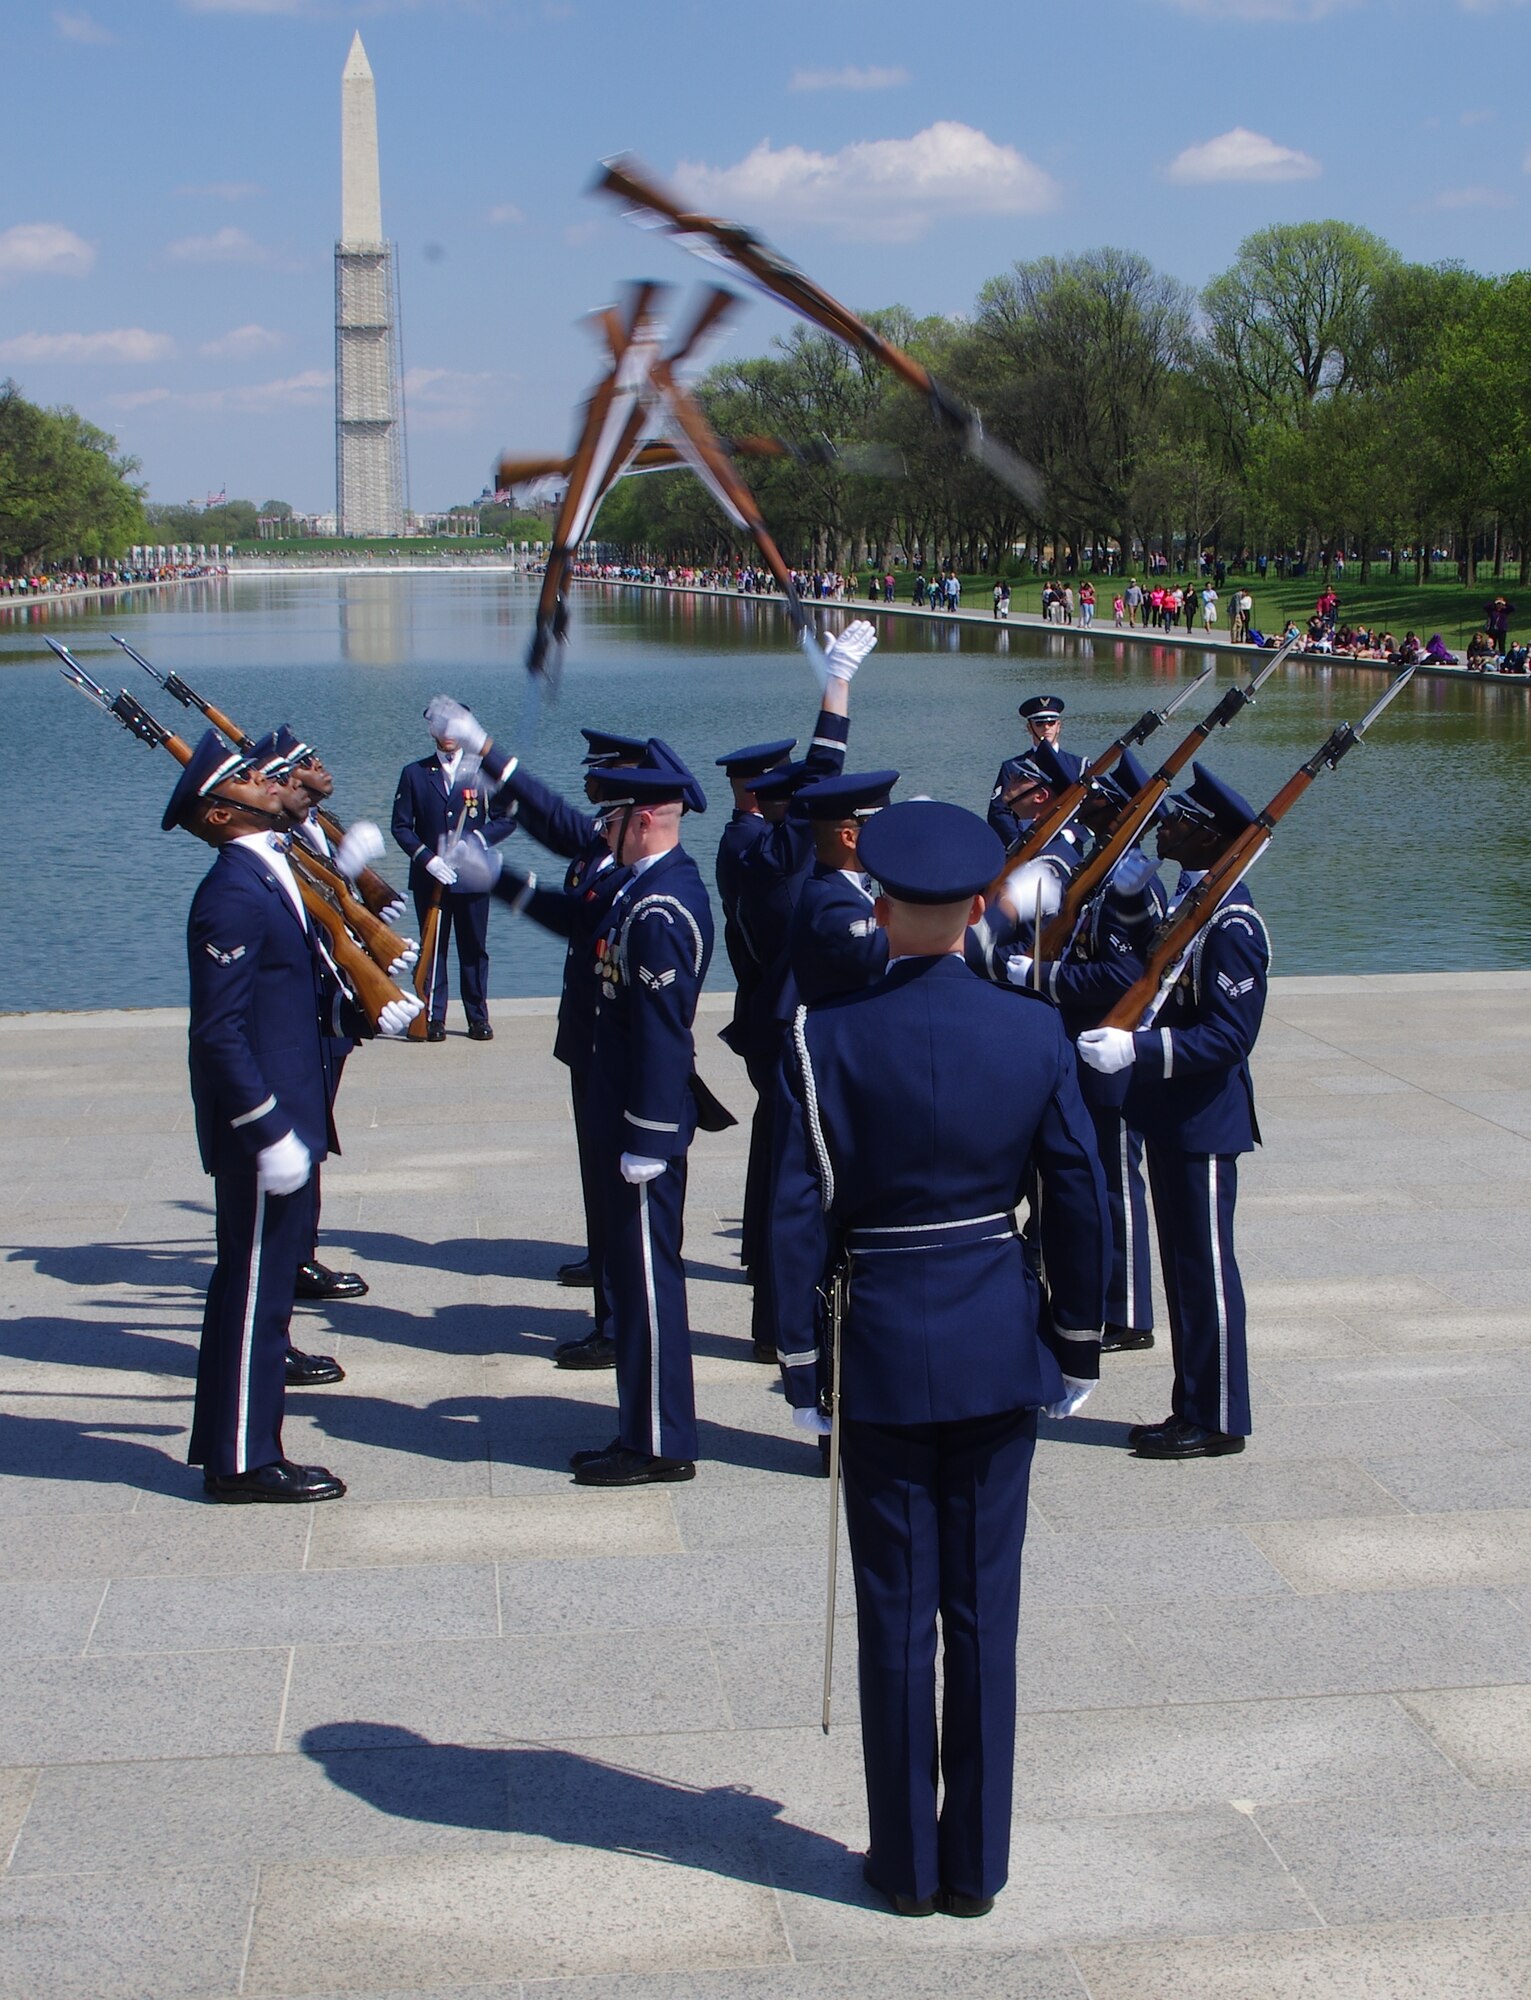 The U.S. Air Force Honor Guard Drill Team throw their rifles  during the joint service drill team exhibition April 13, 2013, at the Lincoln Memorial  in Washington, D.C. Drill teams from all four branches of the U.S. armed forces  and the U.S. Coast Guard displayed their skills at the event that celebrated U.S. military heritage at the National Cherry Blossom Festival. (U.S. Air Force photo/Airman 1st Class Alexander W. Riedel)
